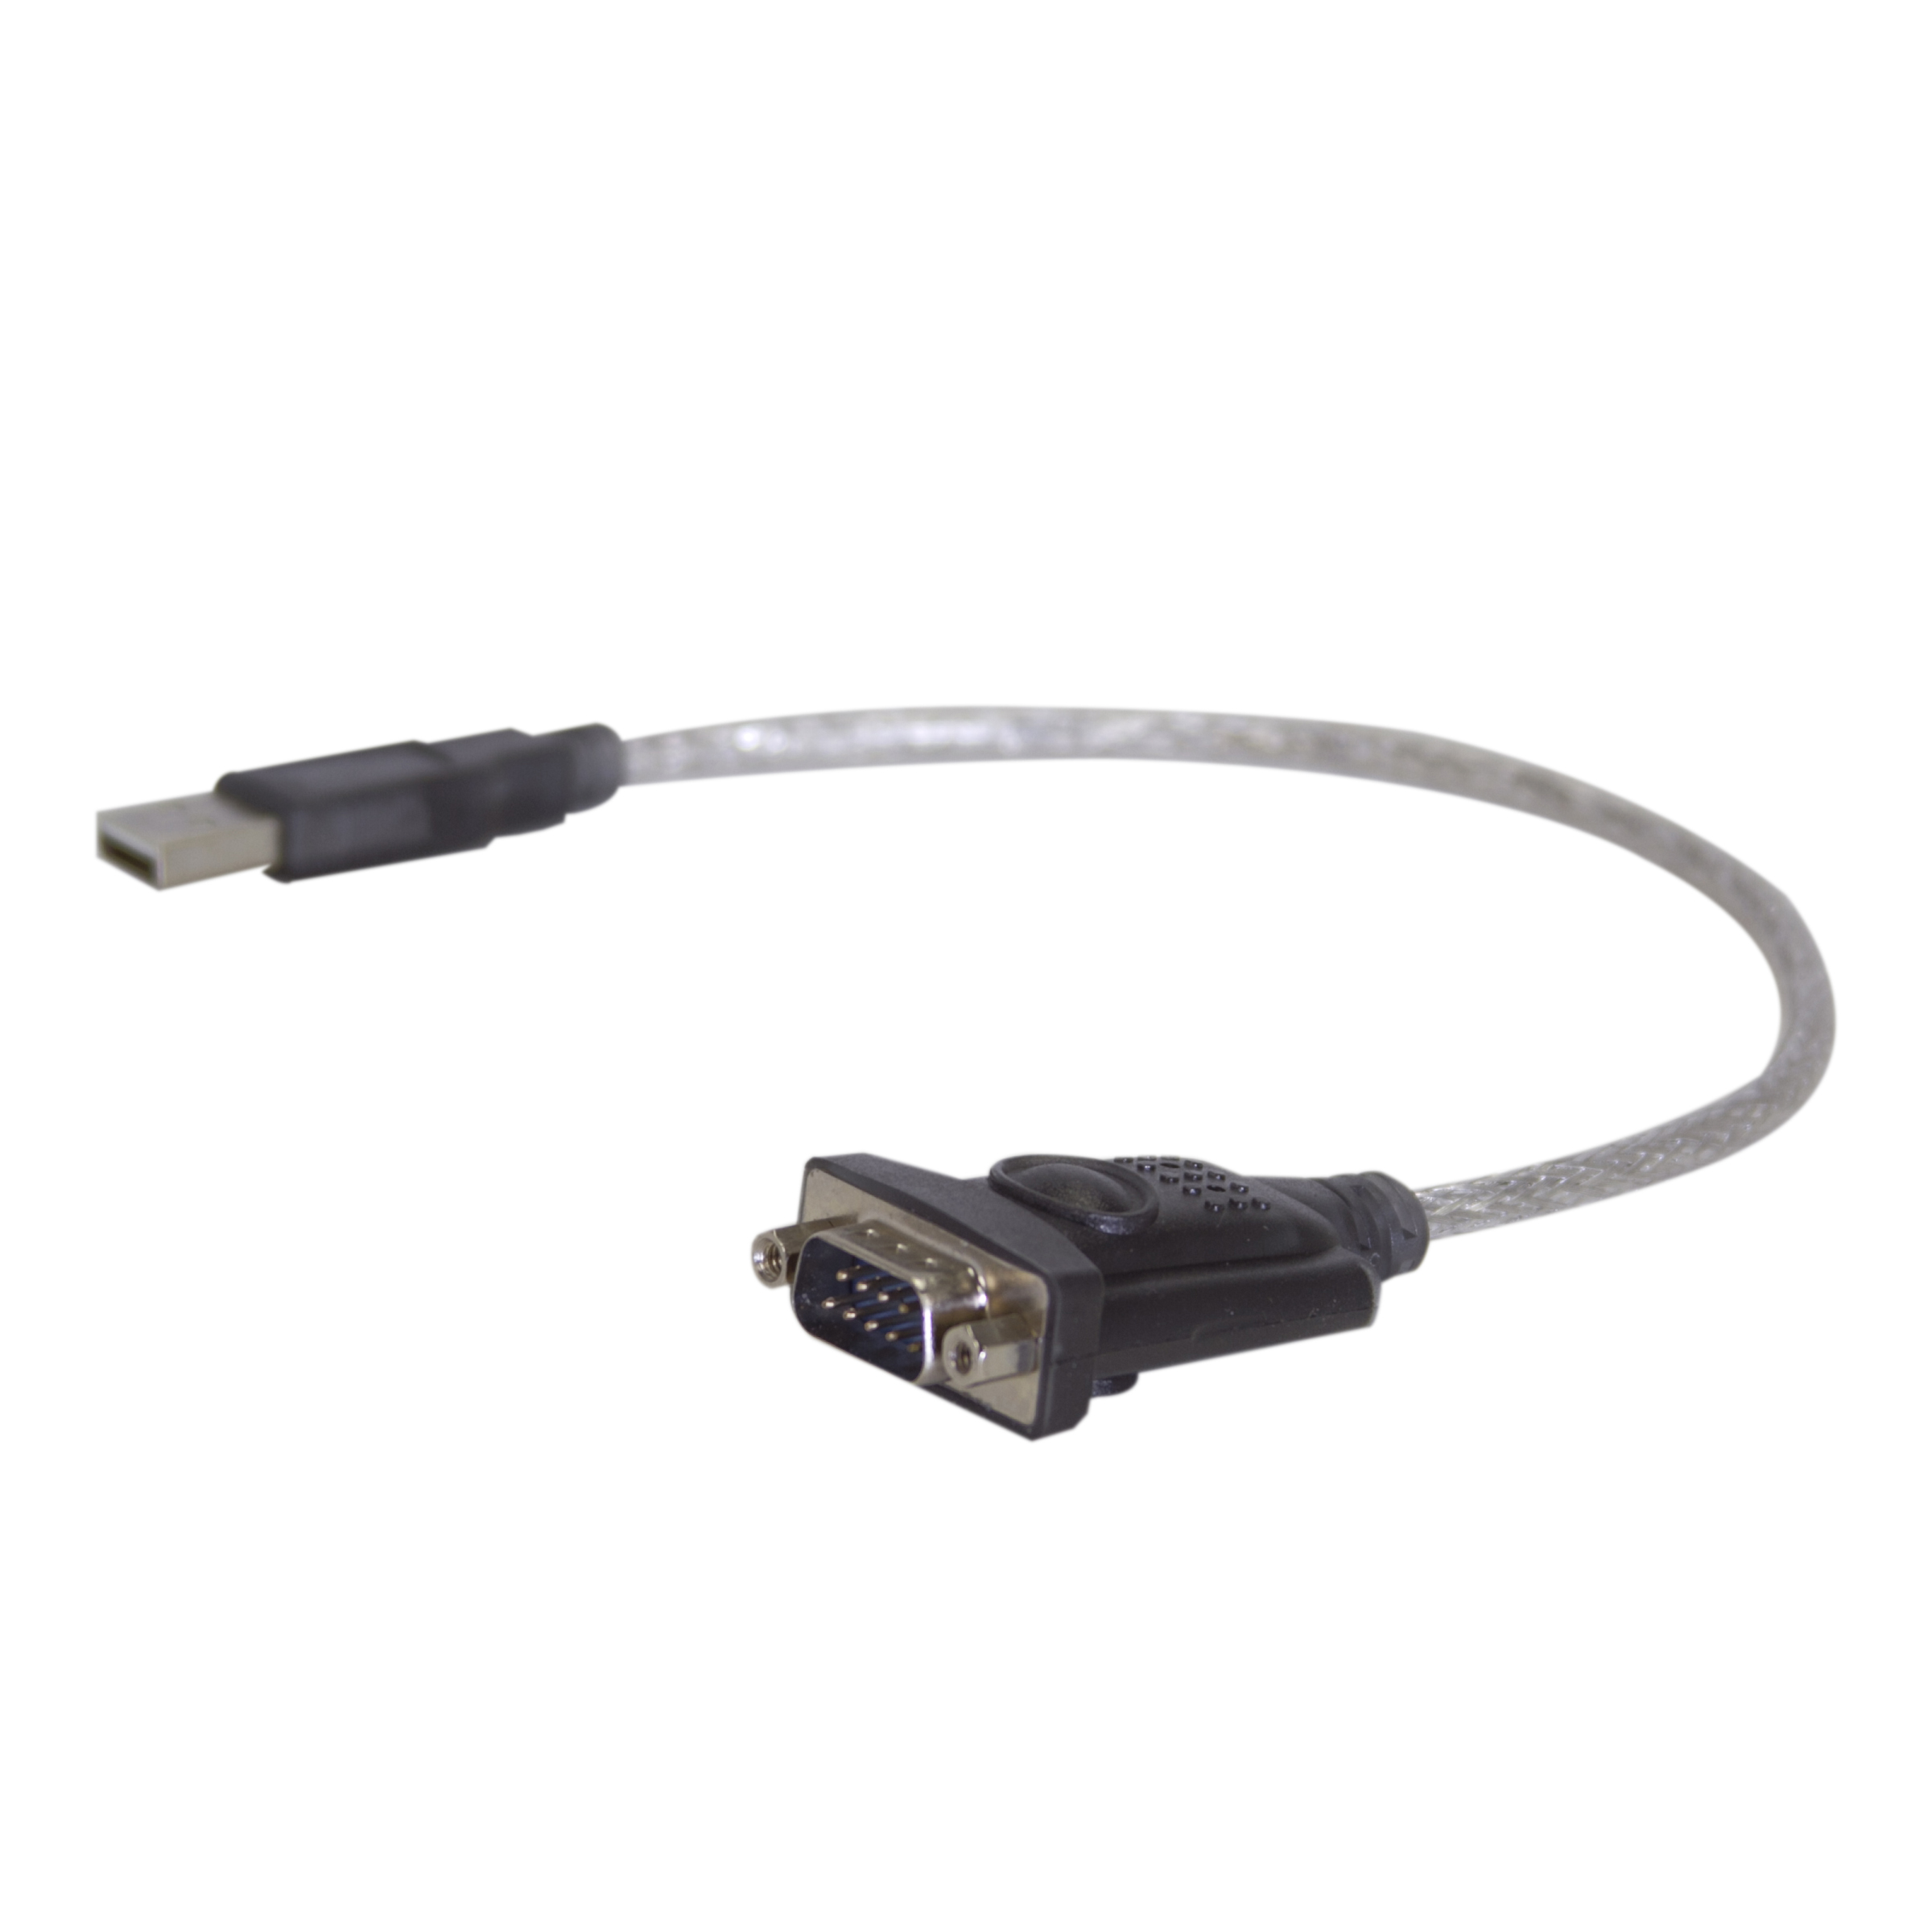 Usb rs232 adapter